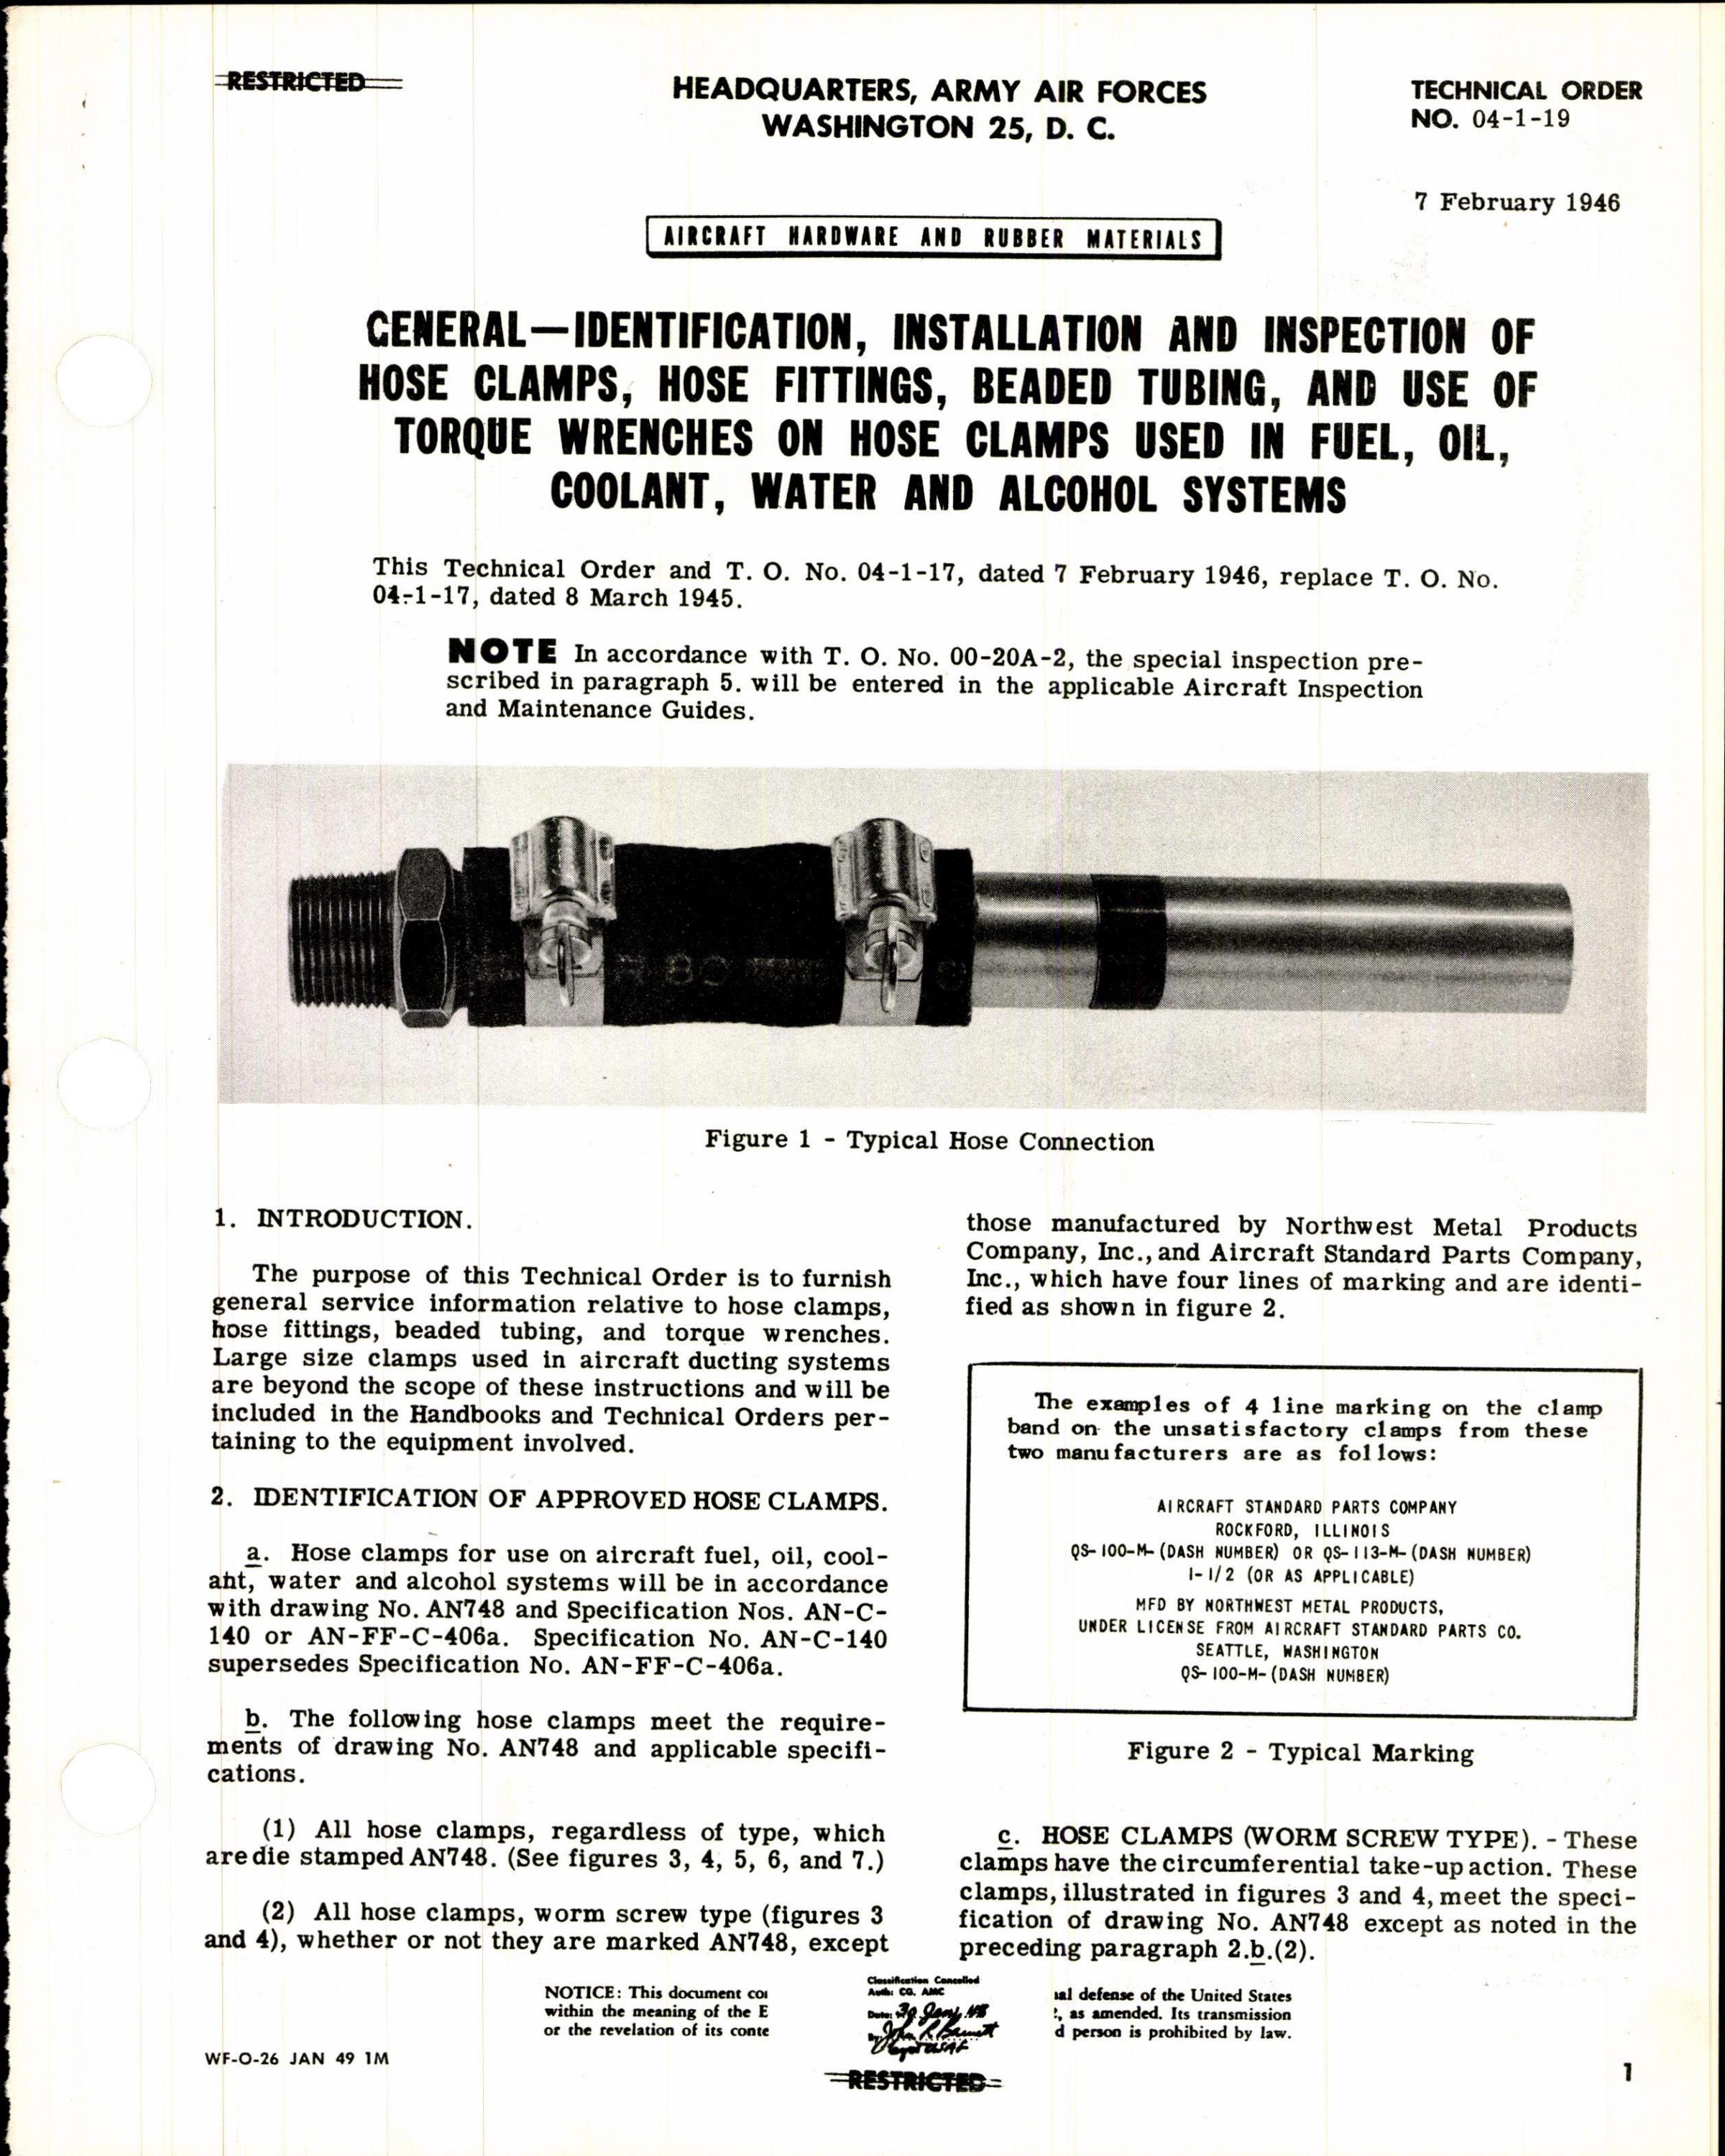 Sample page 1 from AirCorps Library document: Identification, Installation, & Inspection of Hose Clamps, Hose Fittings, Beaded Tubing, and Use of Torque Wrenches on Hose Clamps